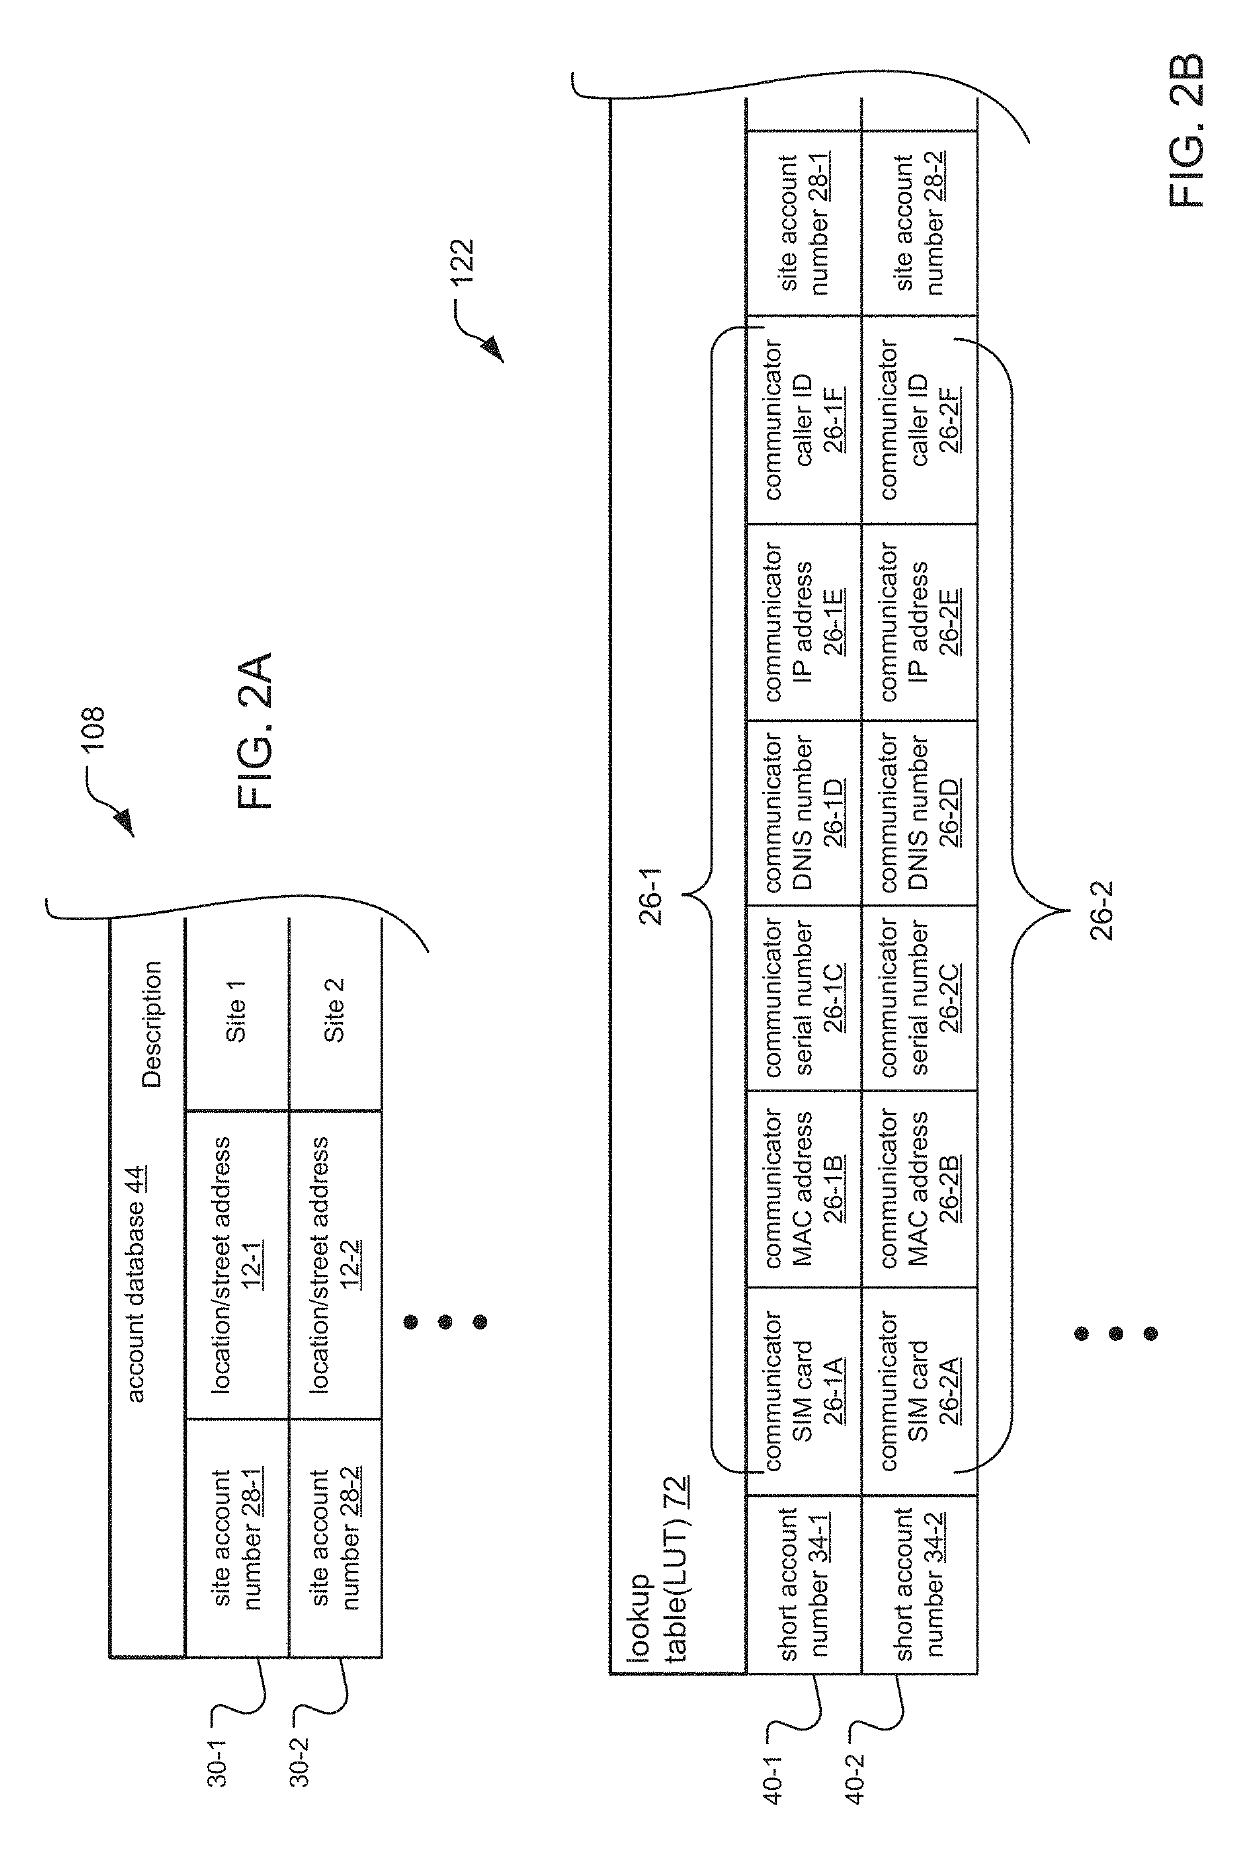 Account number substitution for dial capture and IP based communicators